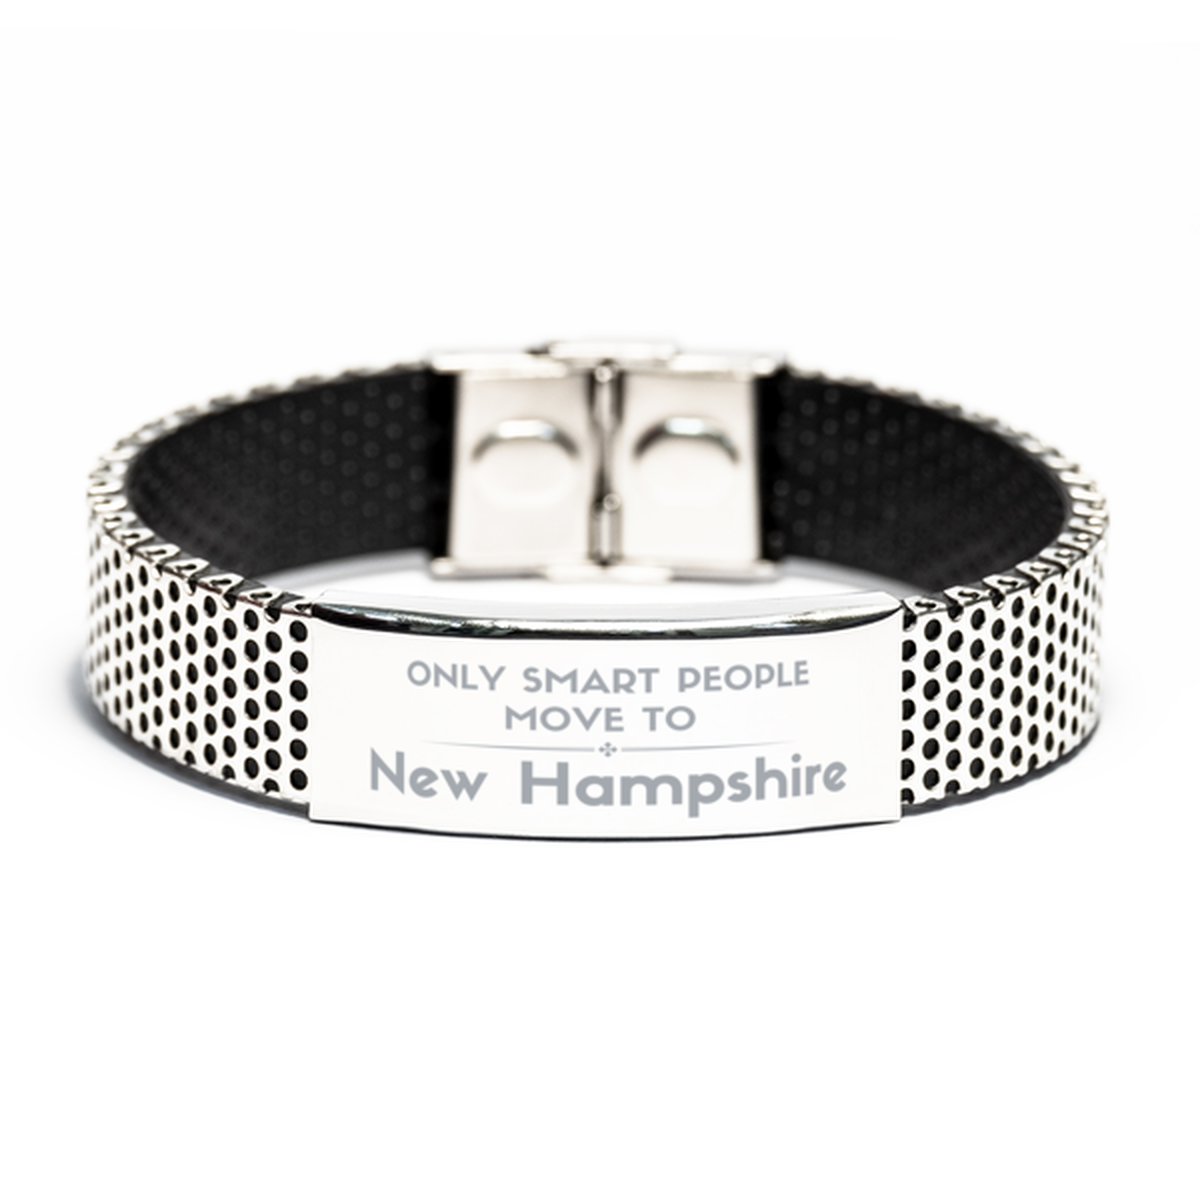 Only smart people move to New Hampshire Stainless Steel Bracelet, Gag Gifts For New Hampshire, Move to New Hampshire Gifts for Friends Coworker Funny Saying Quote